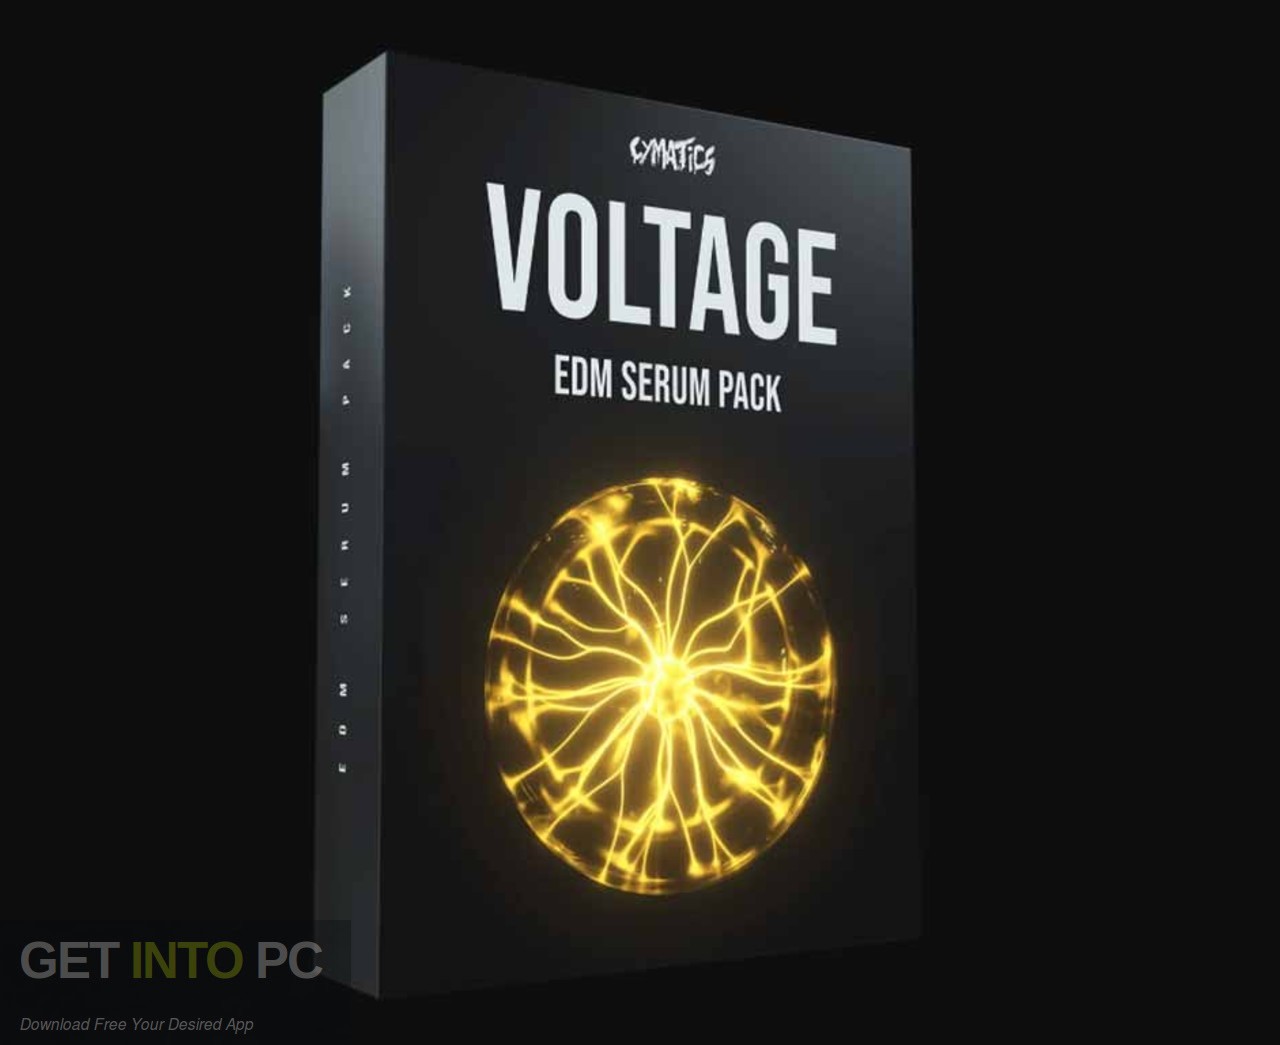 Cymatics - Voltage - the EDM Serum Pack (SYNTH the PRESET) Free Download